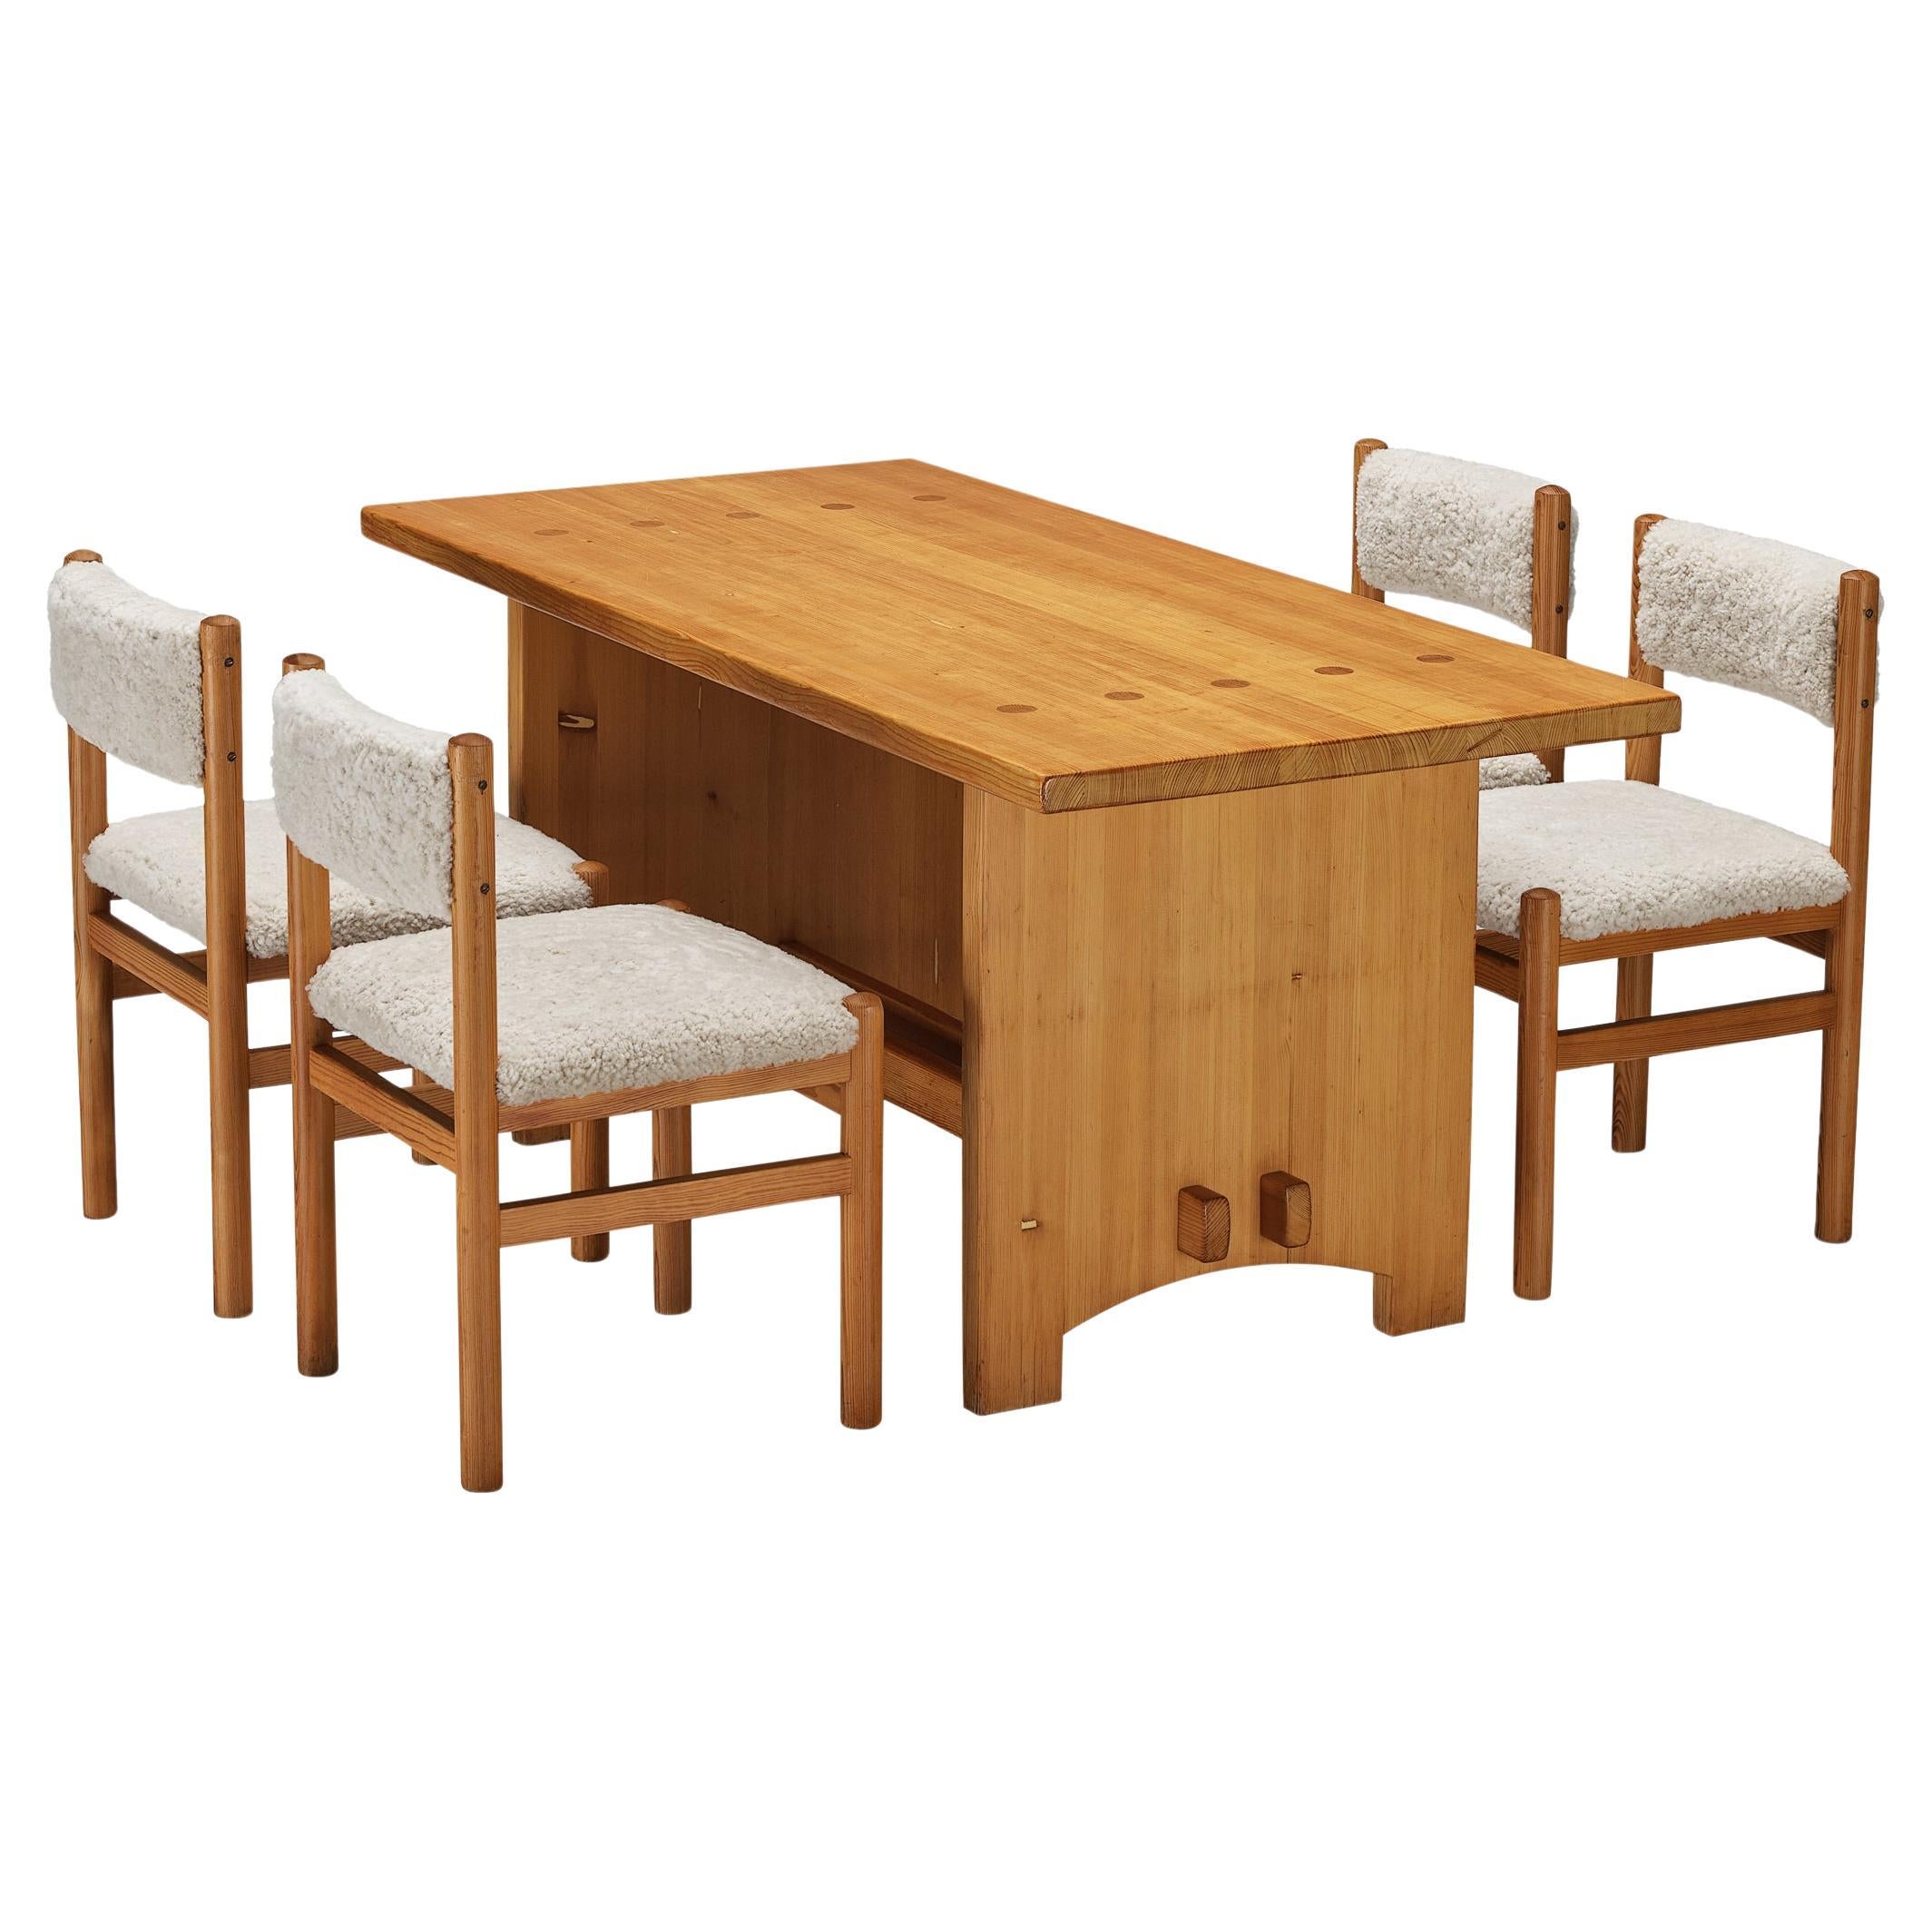 What is the height of a dining table?